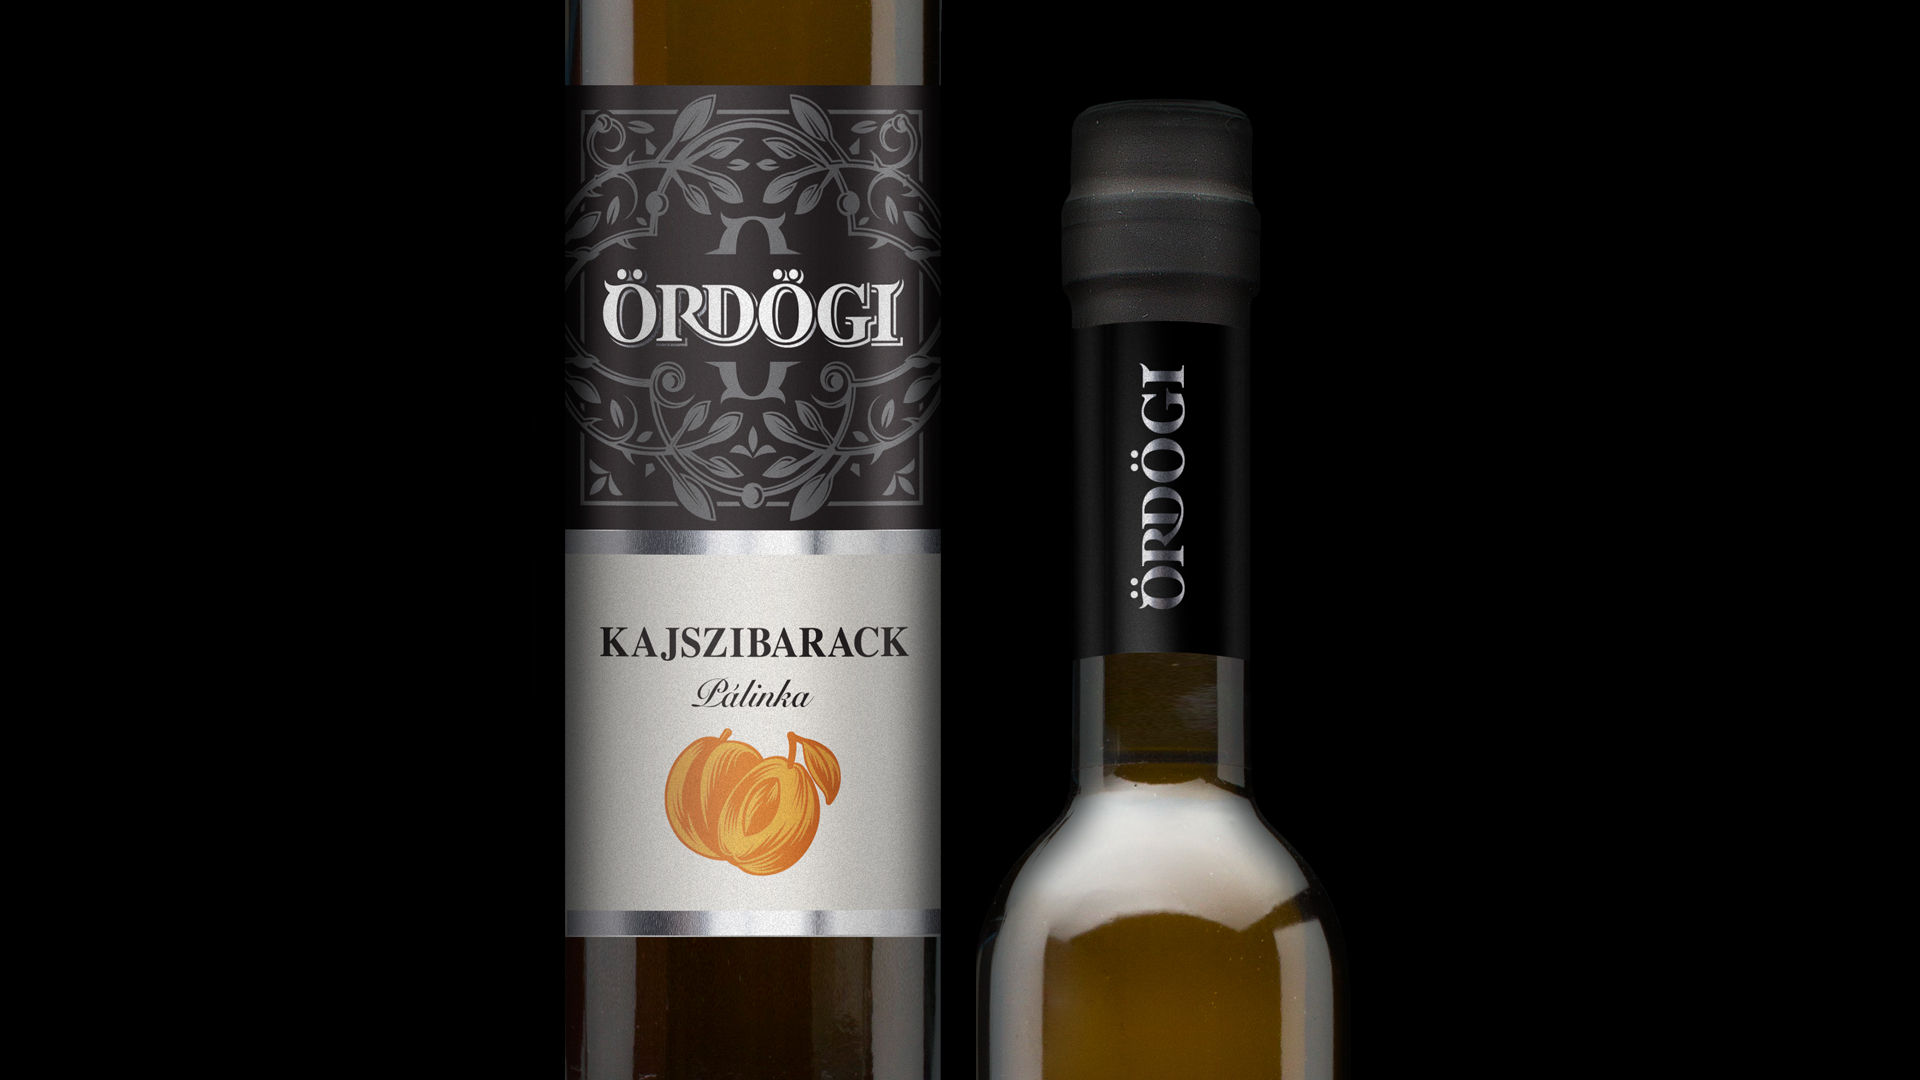 Identity and Packaging Design for Traditional Fruit Brandy in Central Europe with Origins from Hungarian